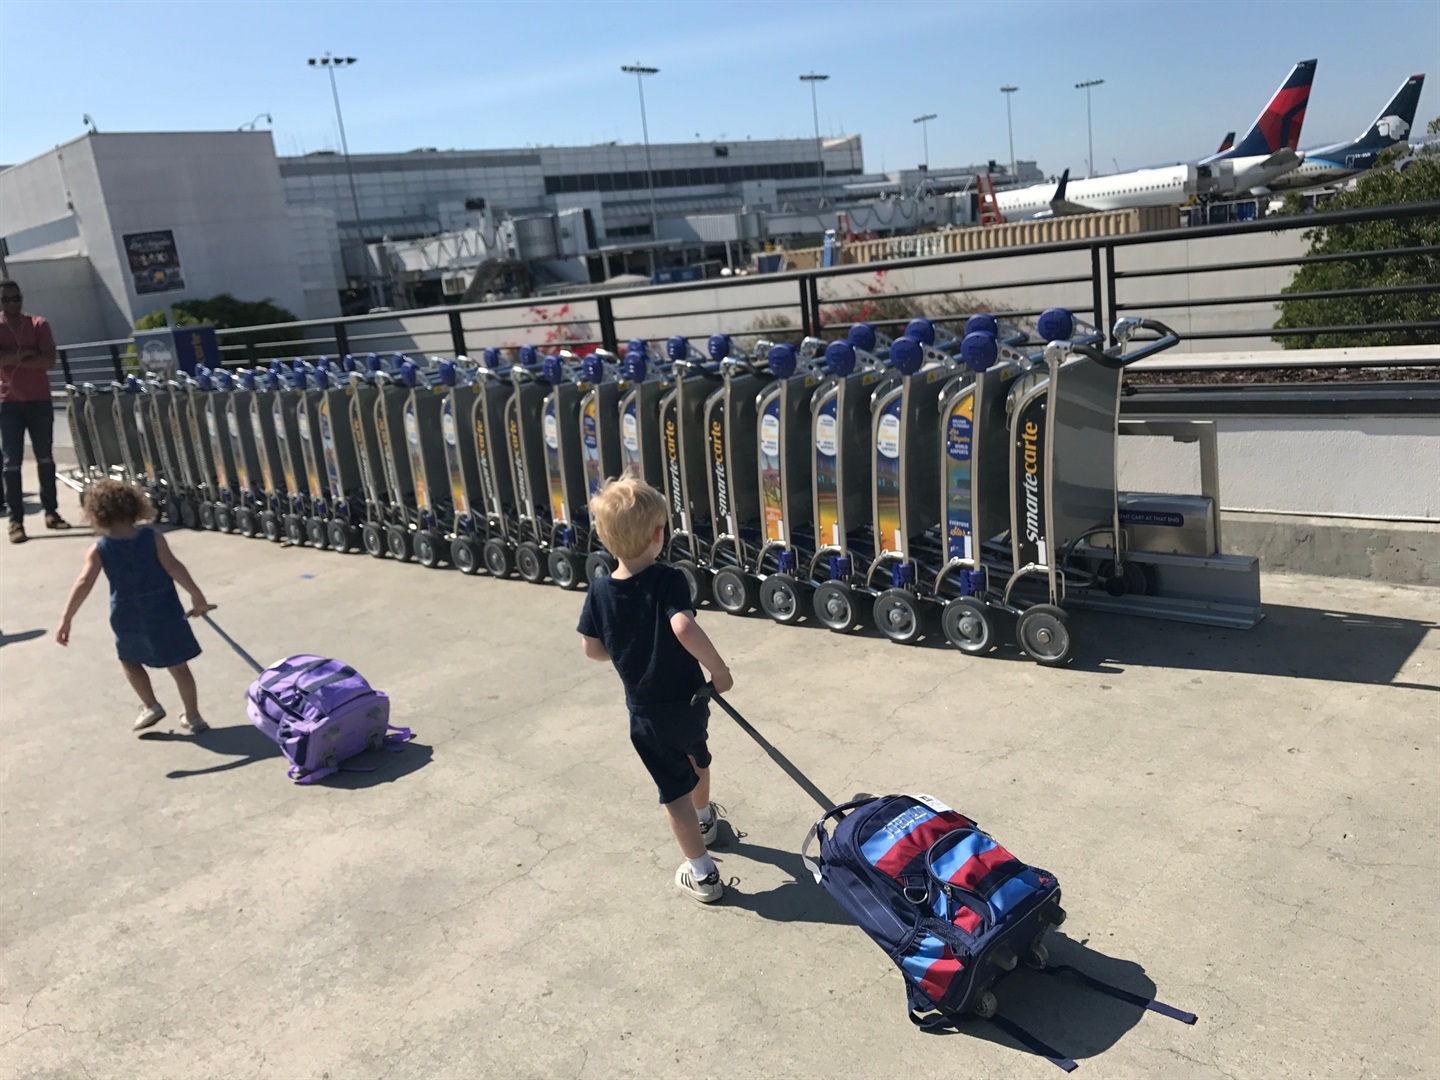 My kids carry their own suitcases.